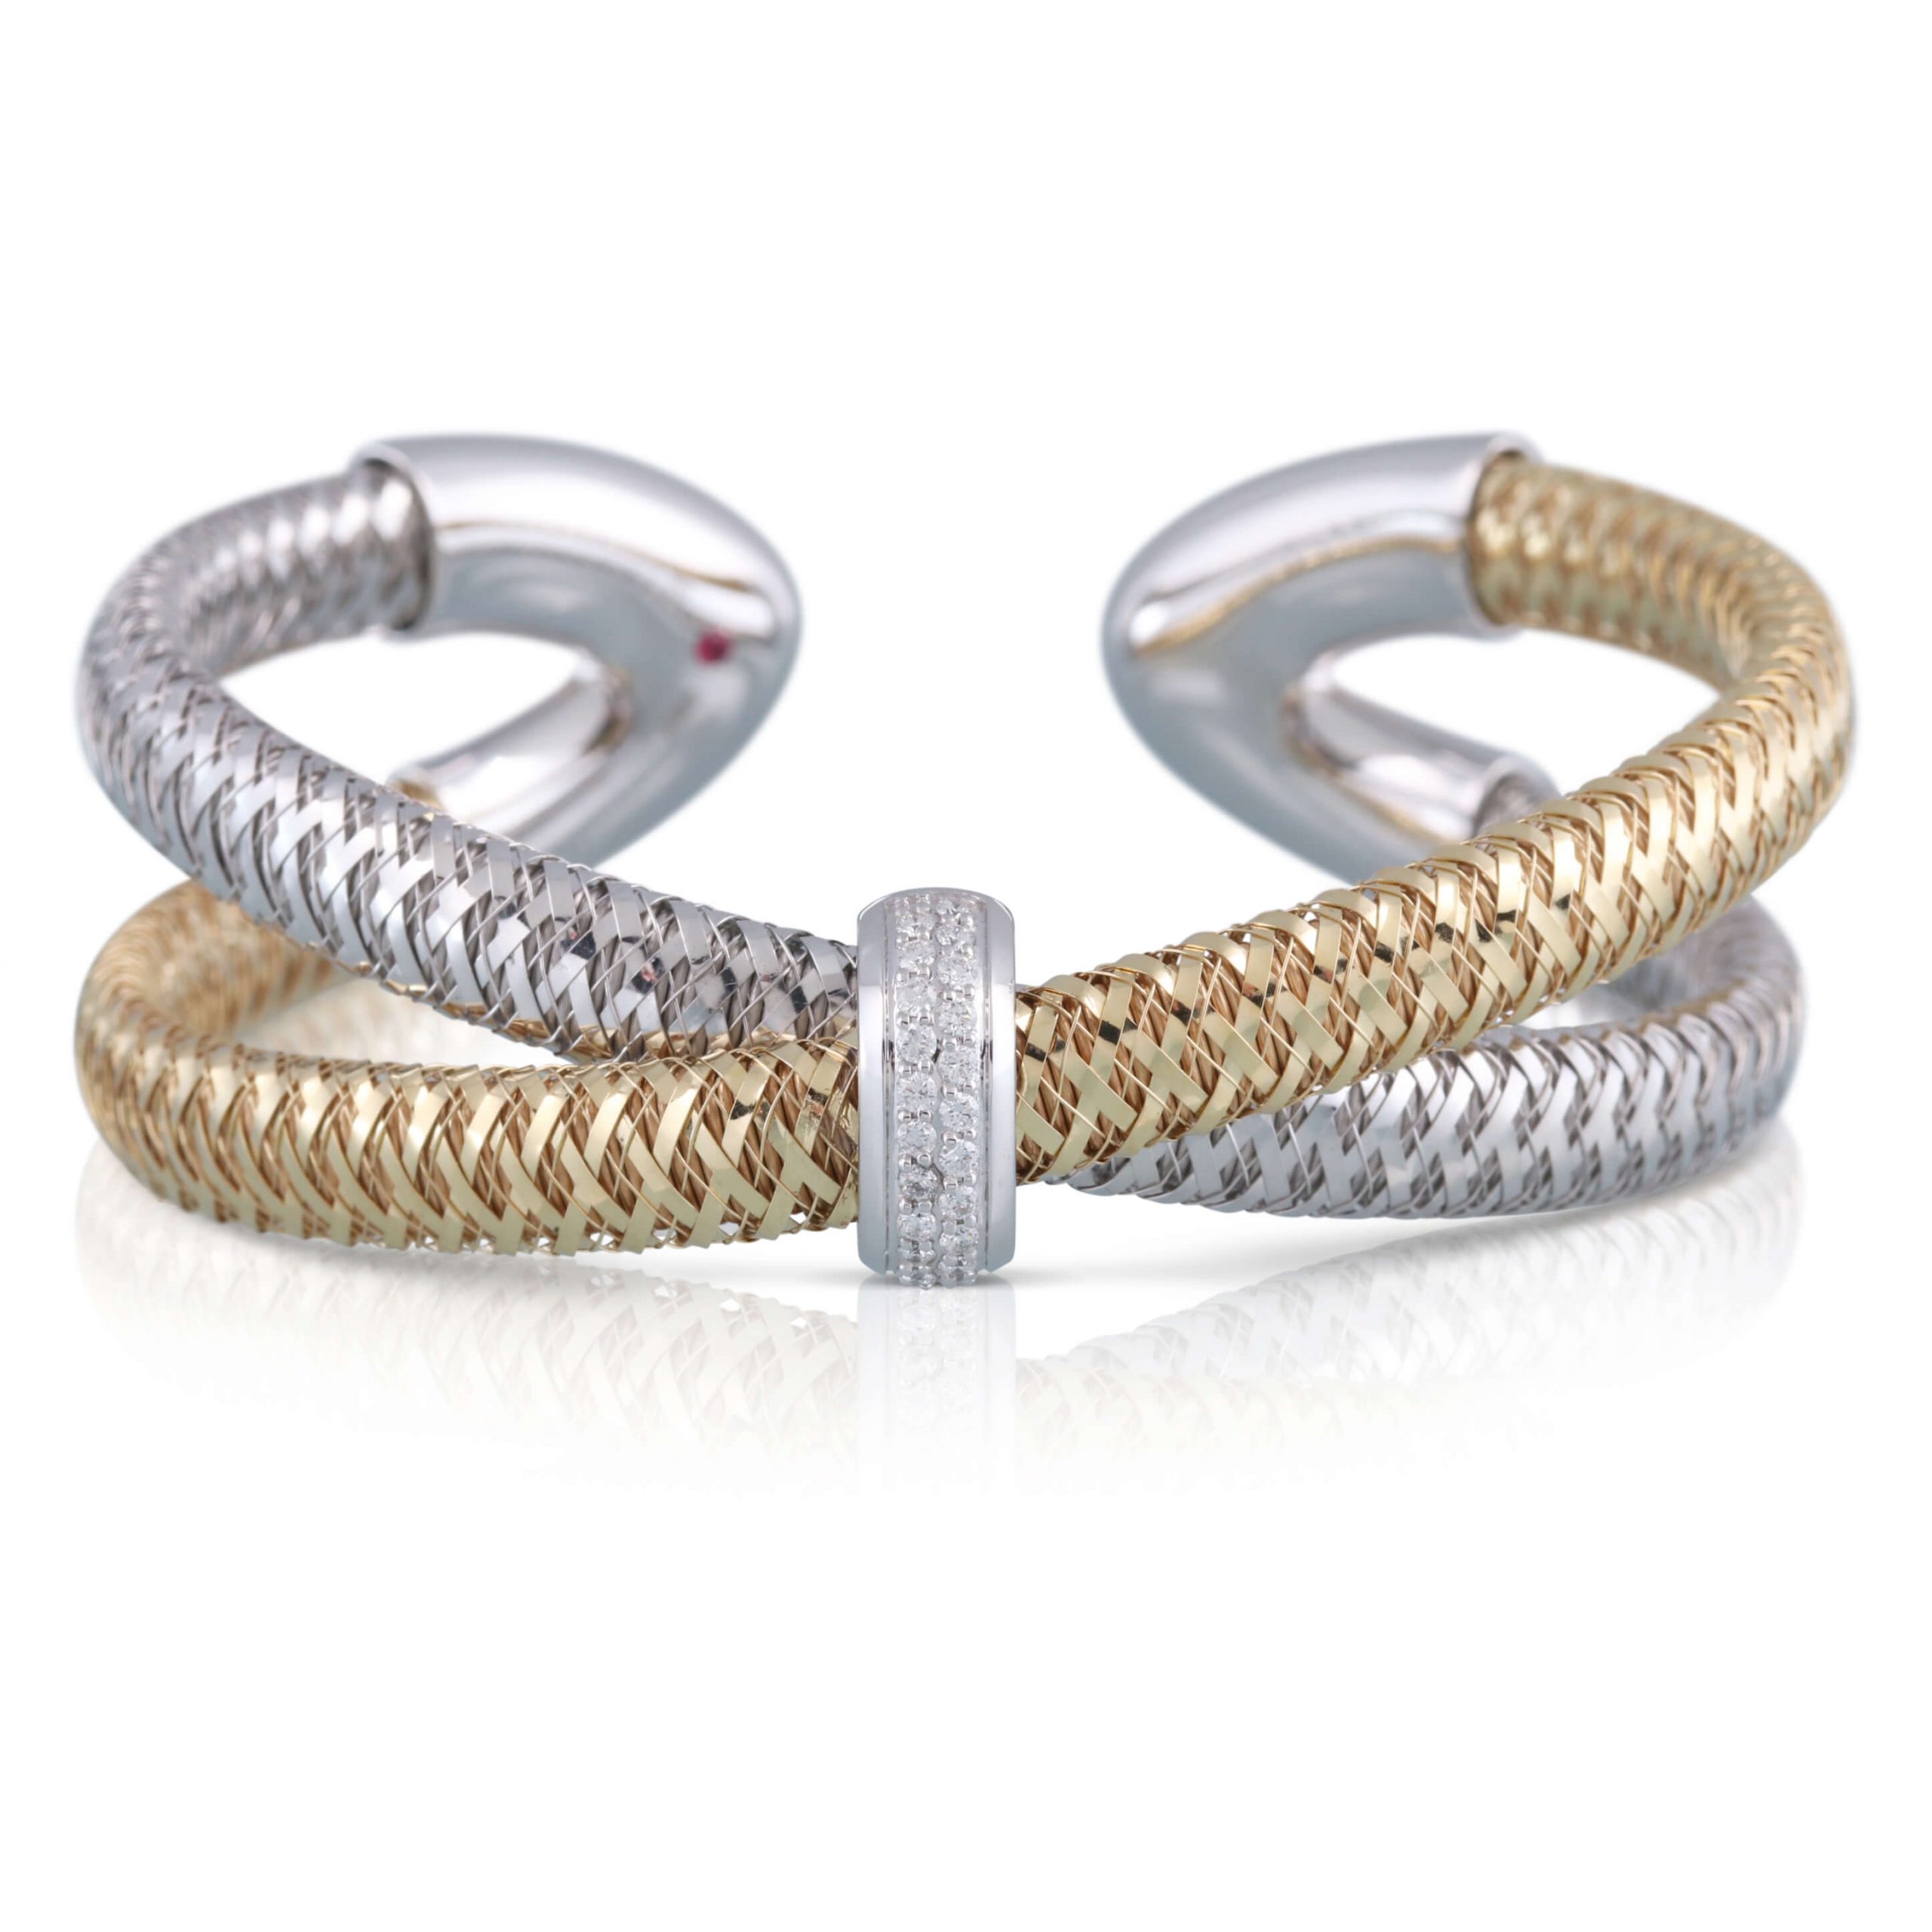 White and yellow gold cuff bracelet. Woven strands of white gold and yellow gold crossover and meet at a high polish white gold V on either end of the cuff. The center features a white gold station with diamonds.